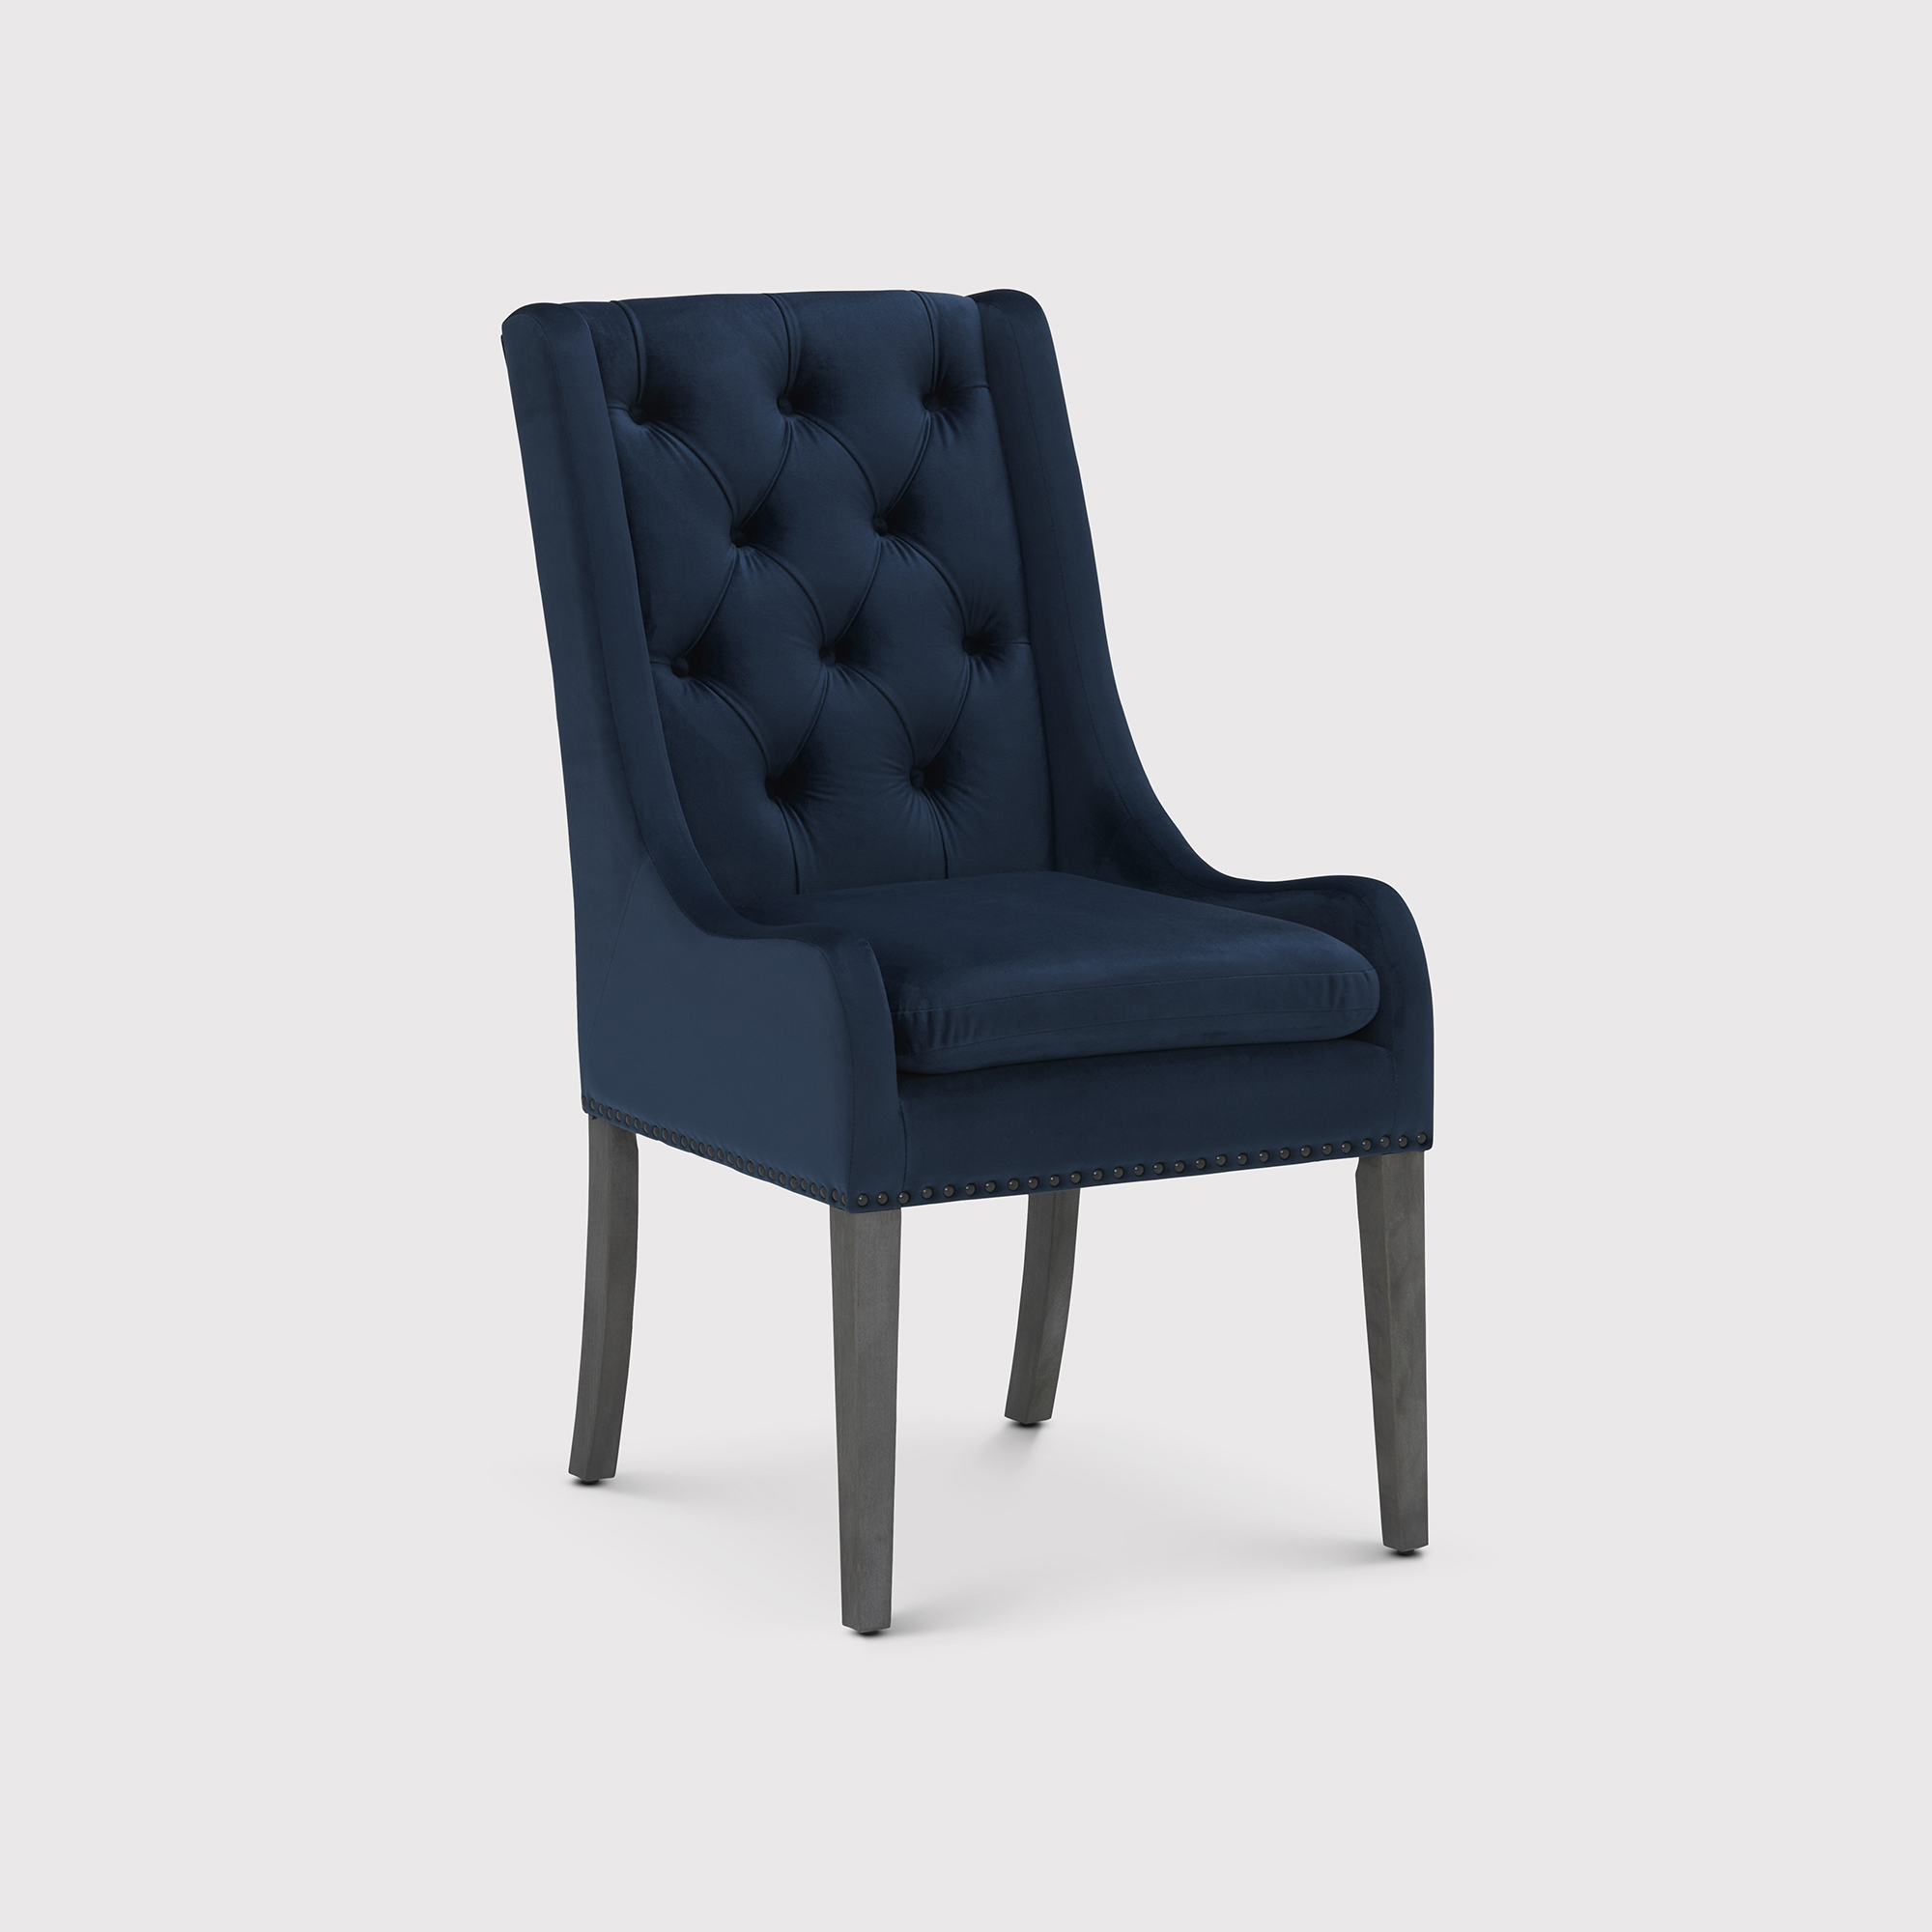 Ophelia Buttoned Back Dining Chair, Navy | Barker & Stonehouse